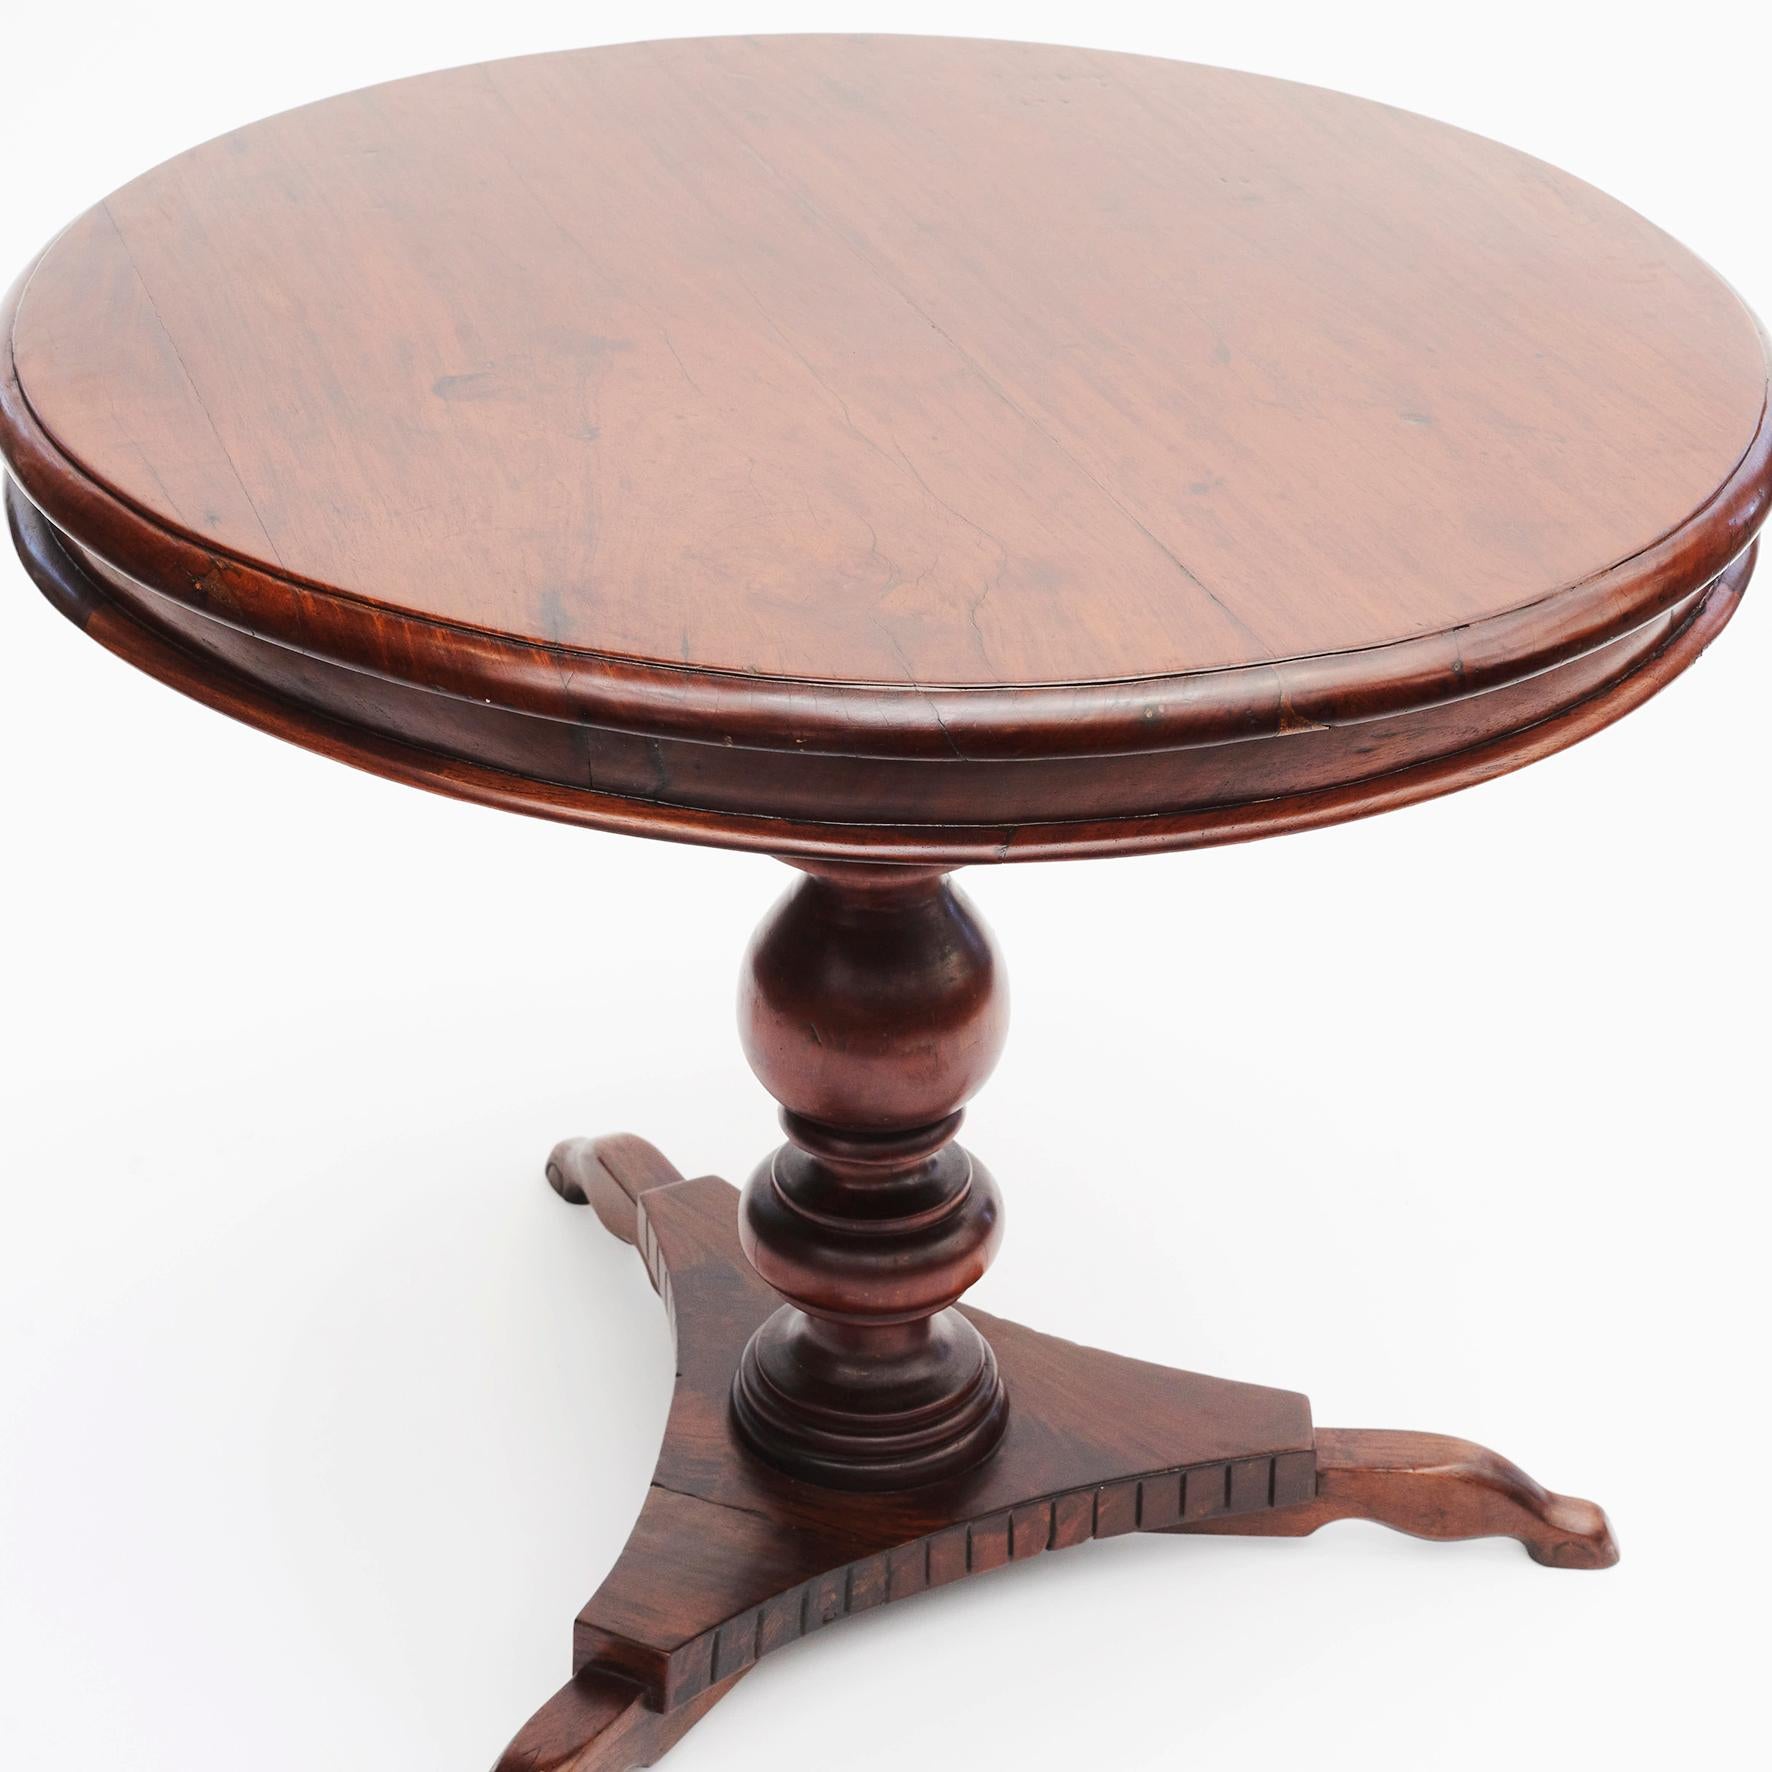 Baluster center table in Narra hardwood with beautiful grain.
Circular top above baluster turned column and triform base.
 
Narra hardwood is a totally protected species and the Philippines national tree – with a very beautiful grain.
The